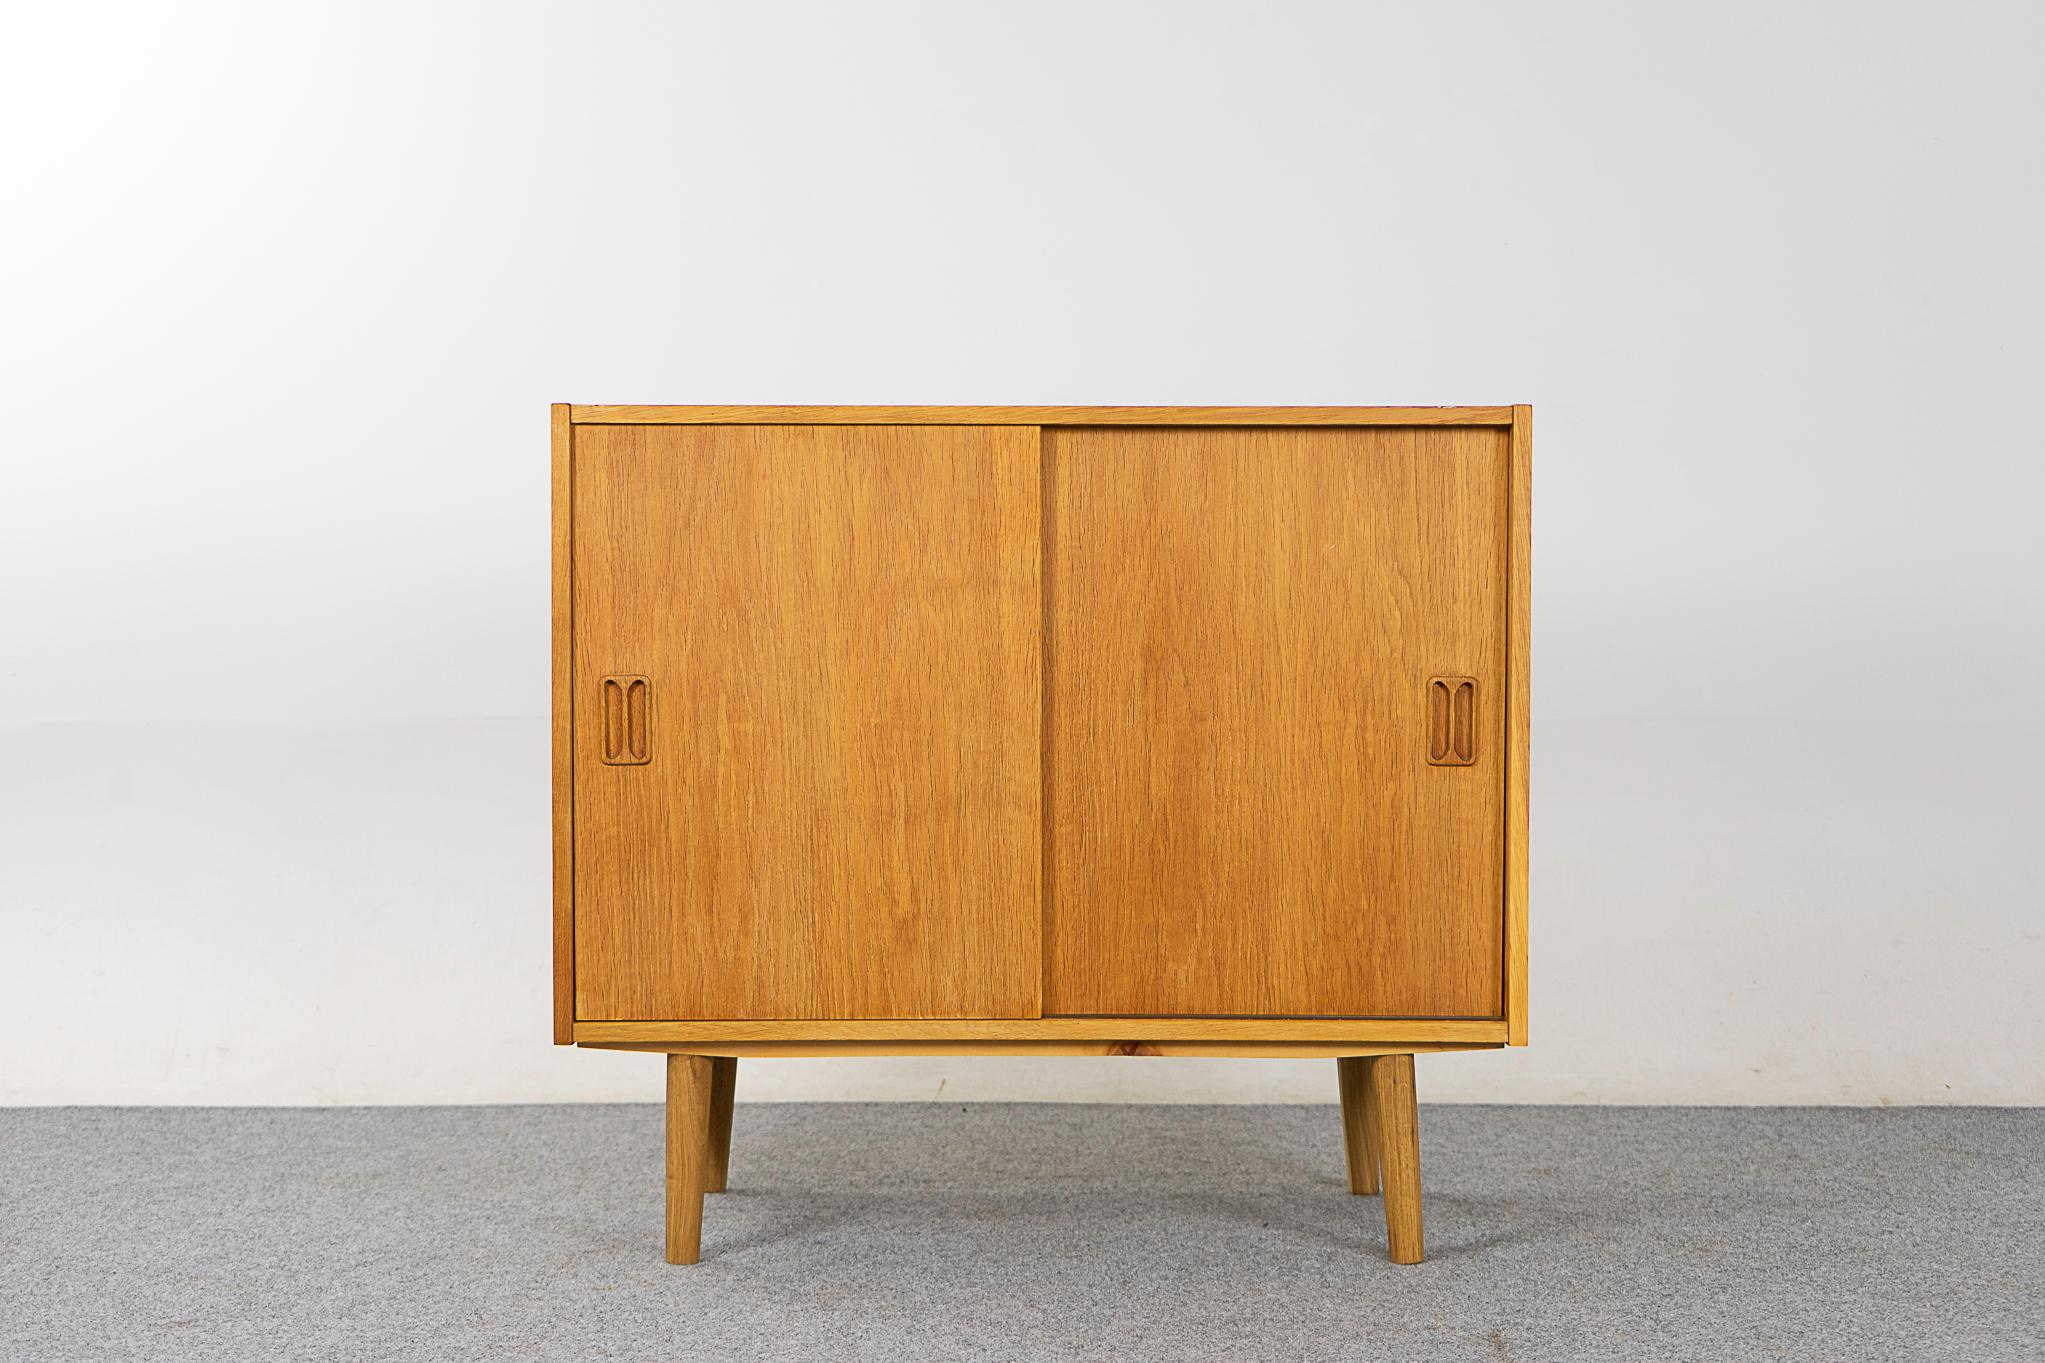 Oak Danish cabinet, circa 1960's. Solid wood handles, adjustable shelf and removable legs. Compact design, the perfect condo sized storage solution.